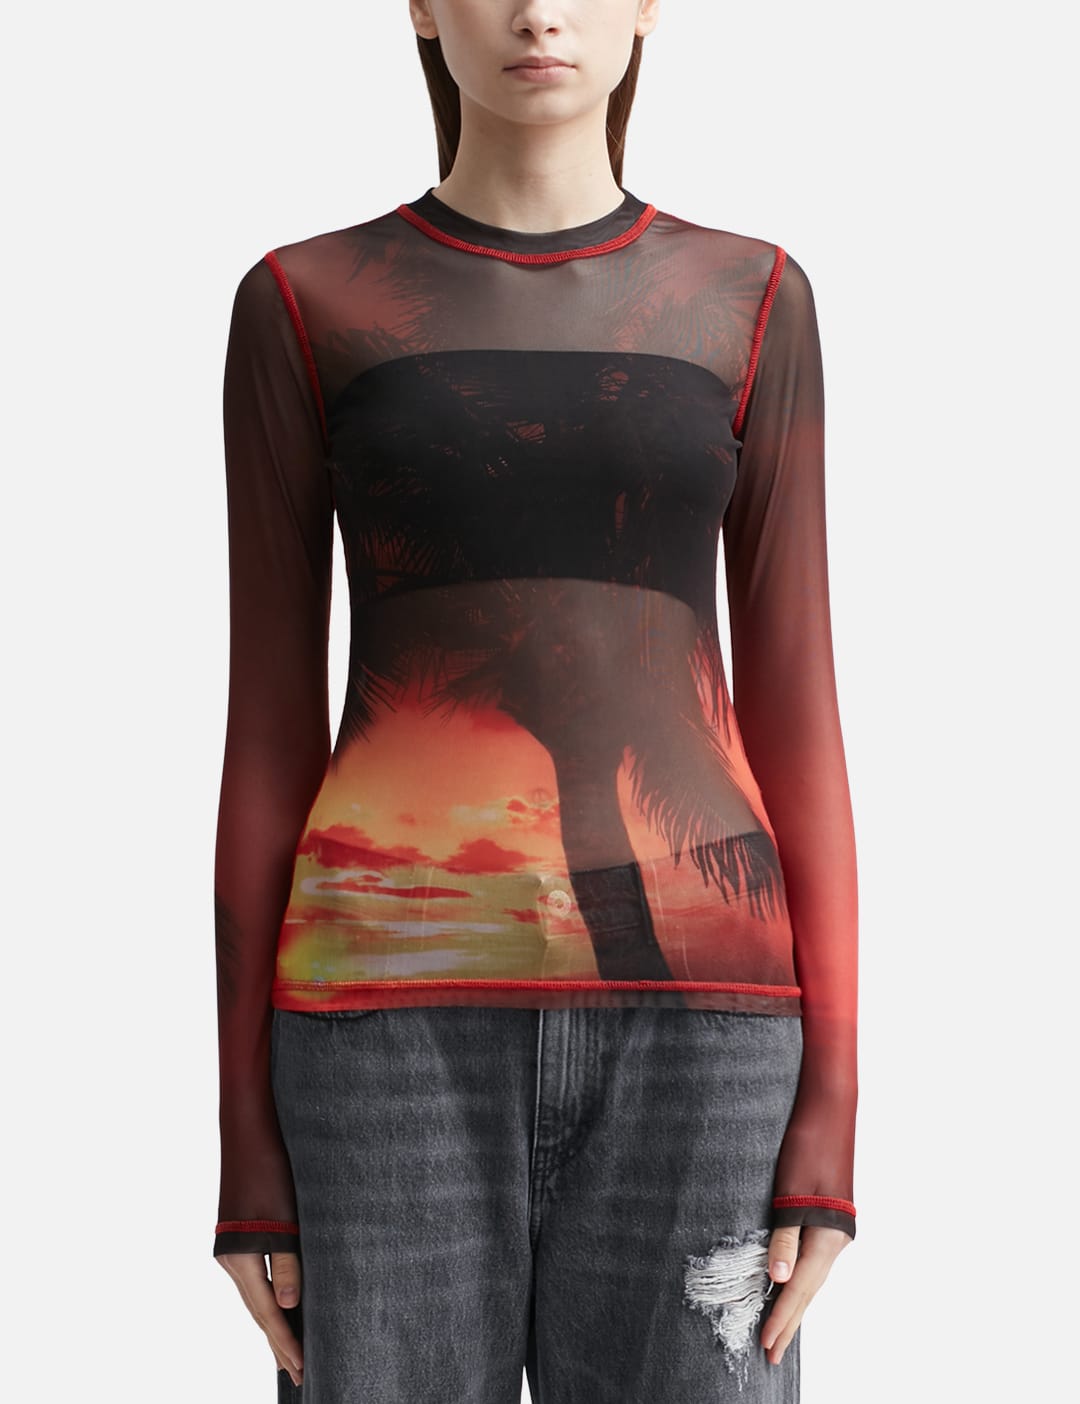 MISCHIEF - Printed Mock Neck Cycling Jersey Top | HBX - Globally 